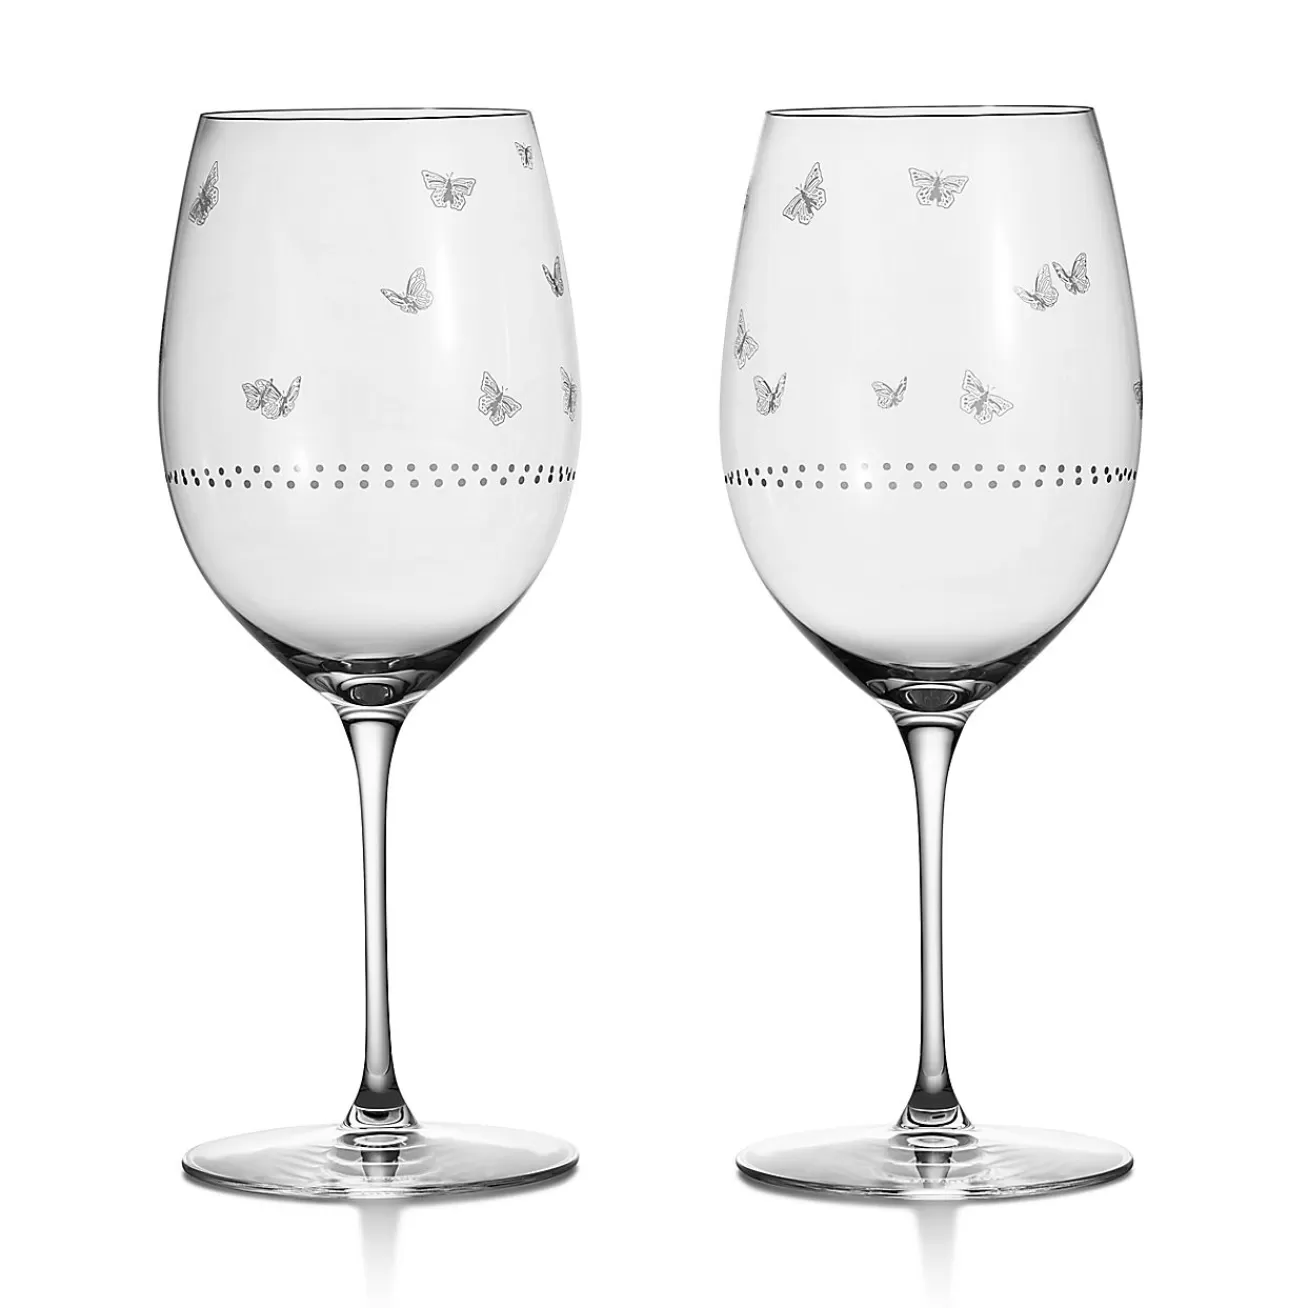 Tiffany & Co. Tiffany Jardin Red Wine Glasses in Etched Glass, Set of Two | ^ The Home | Housewarming Gifts